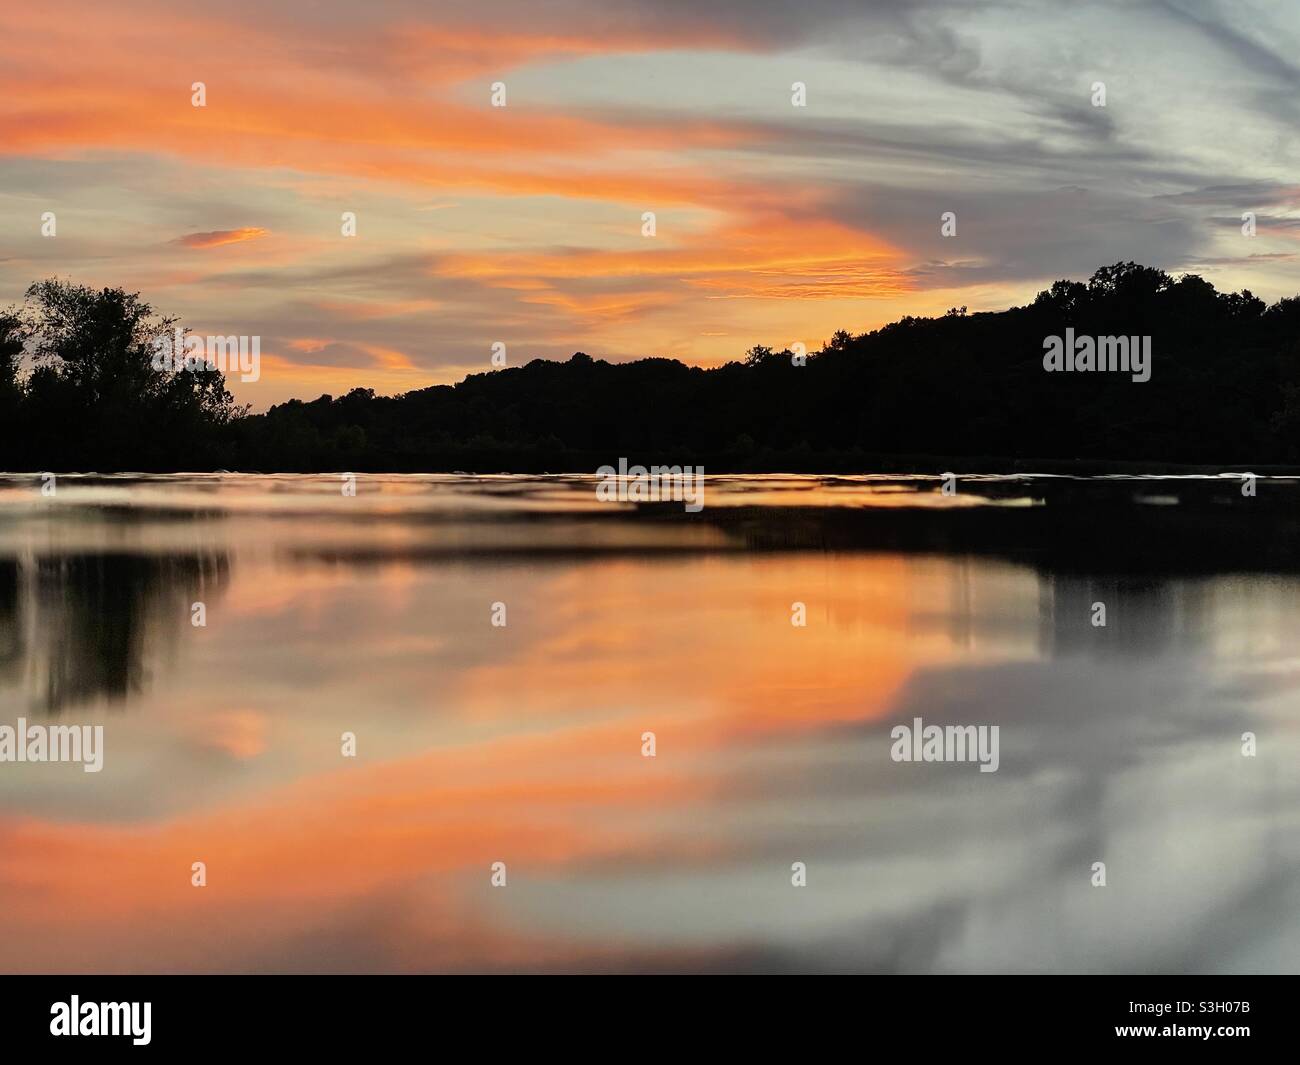 A bright orange sunset reflected over the James River in Richmond, VA. Stock Photo